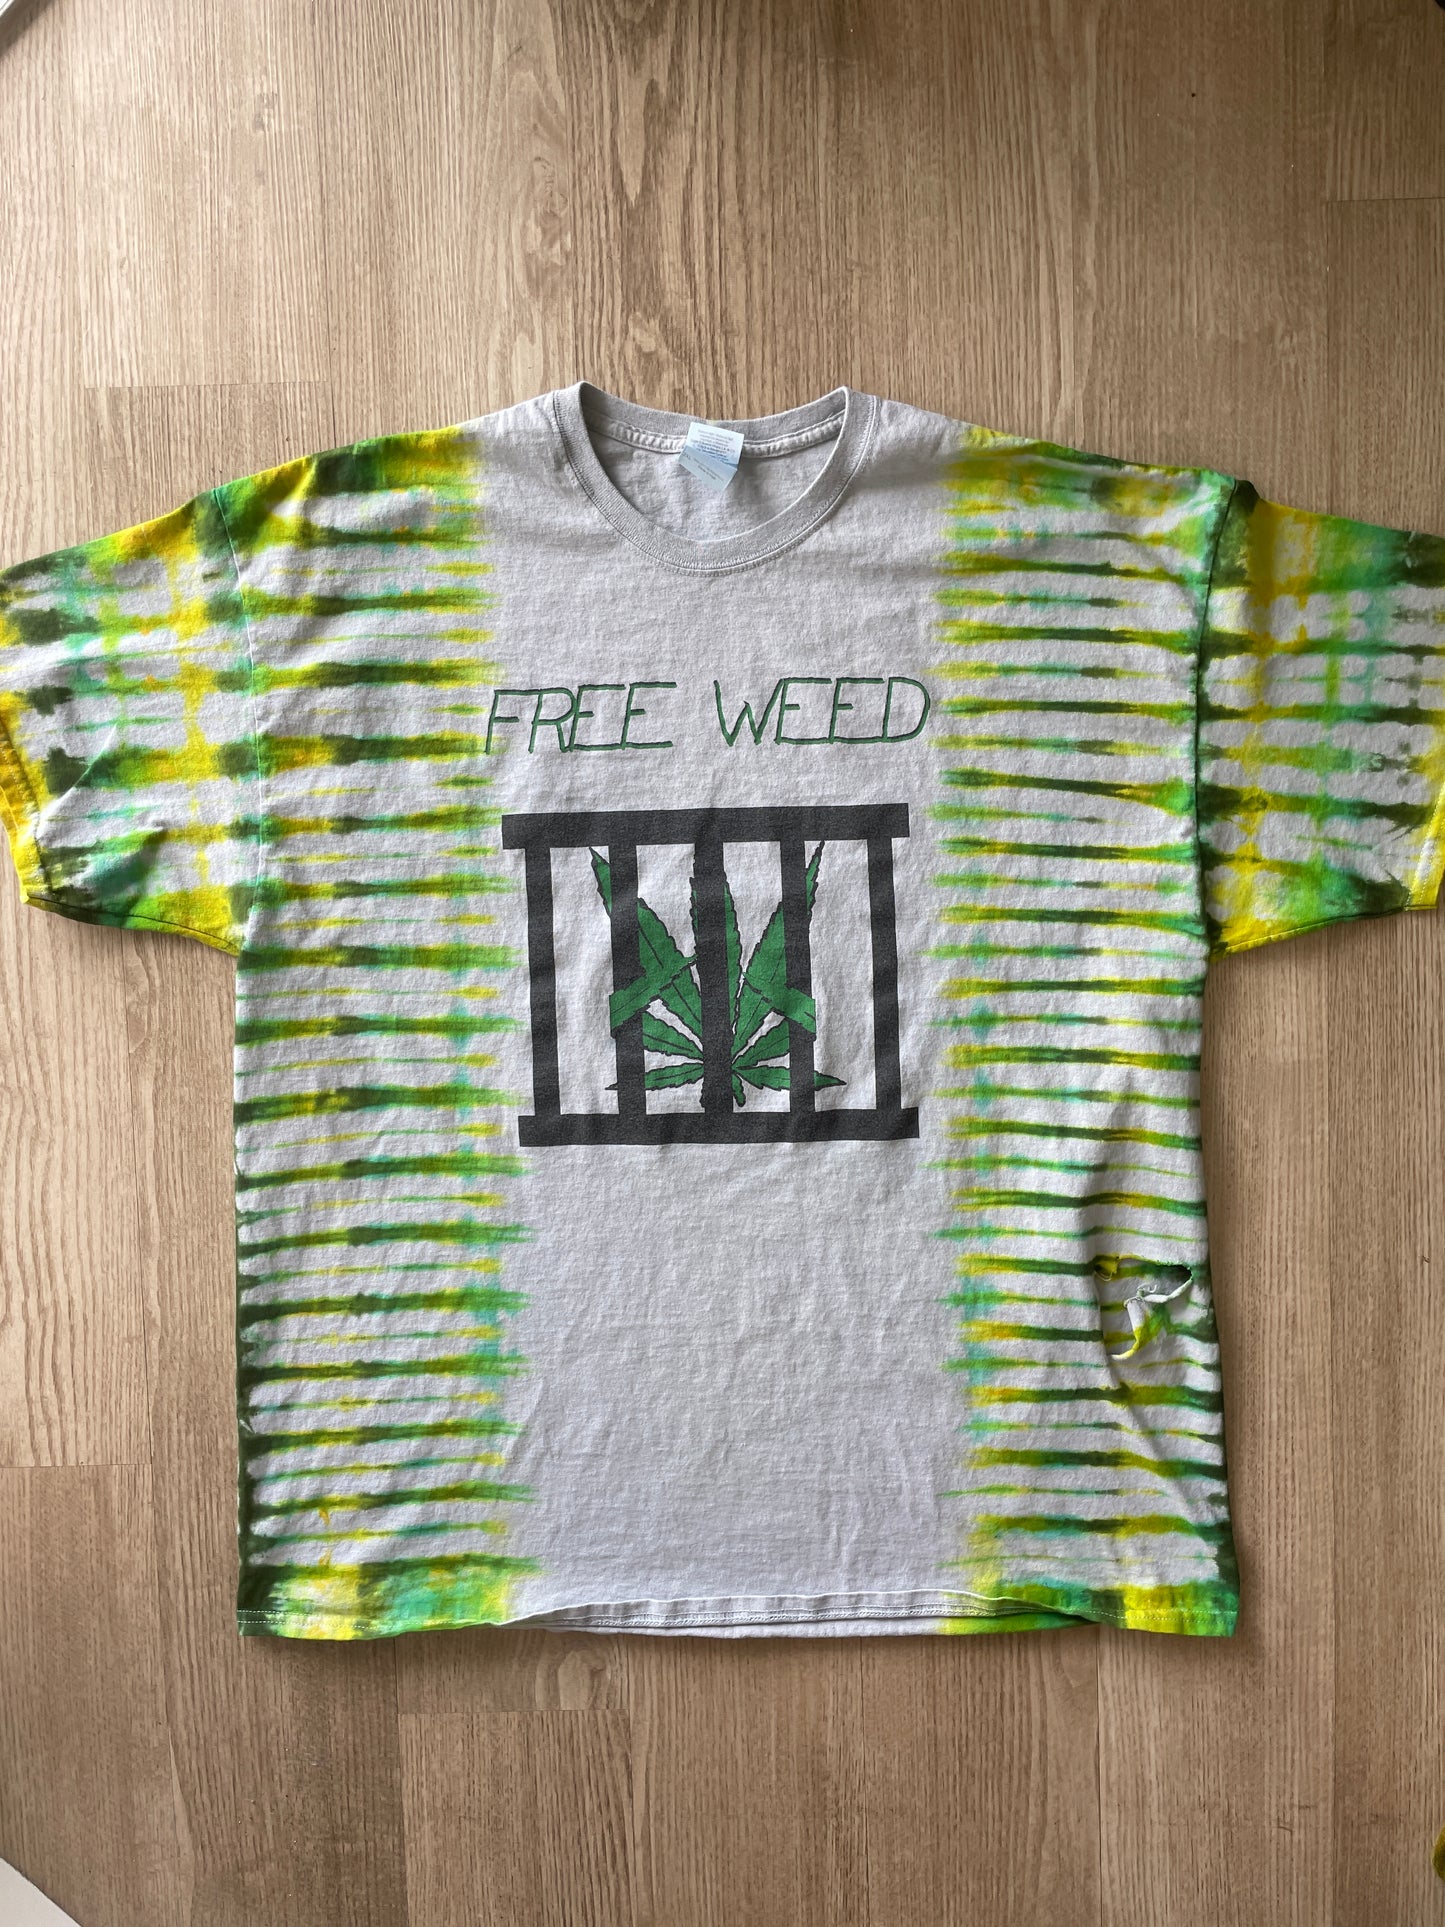 2XL Men’s Vintage Free Weed | It's Only Medicinal Double-Sided Handmade Tie Dye T-Shirt | One-Of-a-Kind White and Green Vintage Short Sleeve Shirt